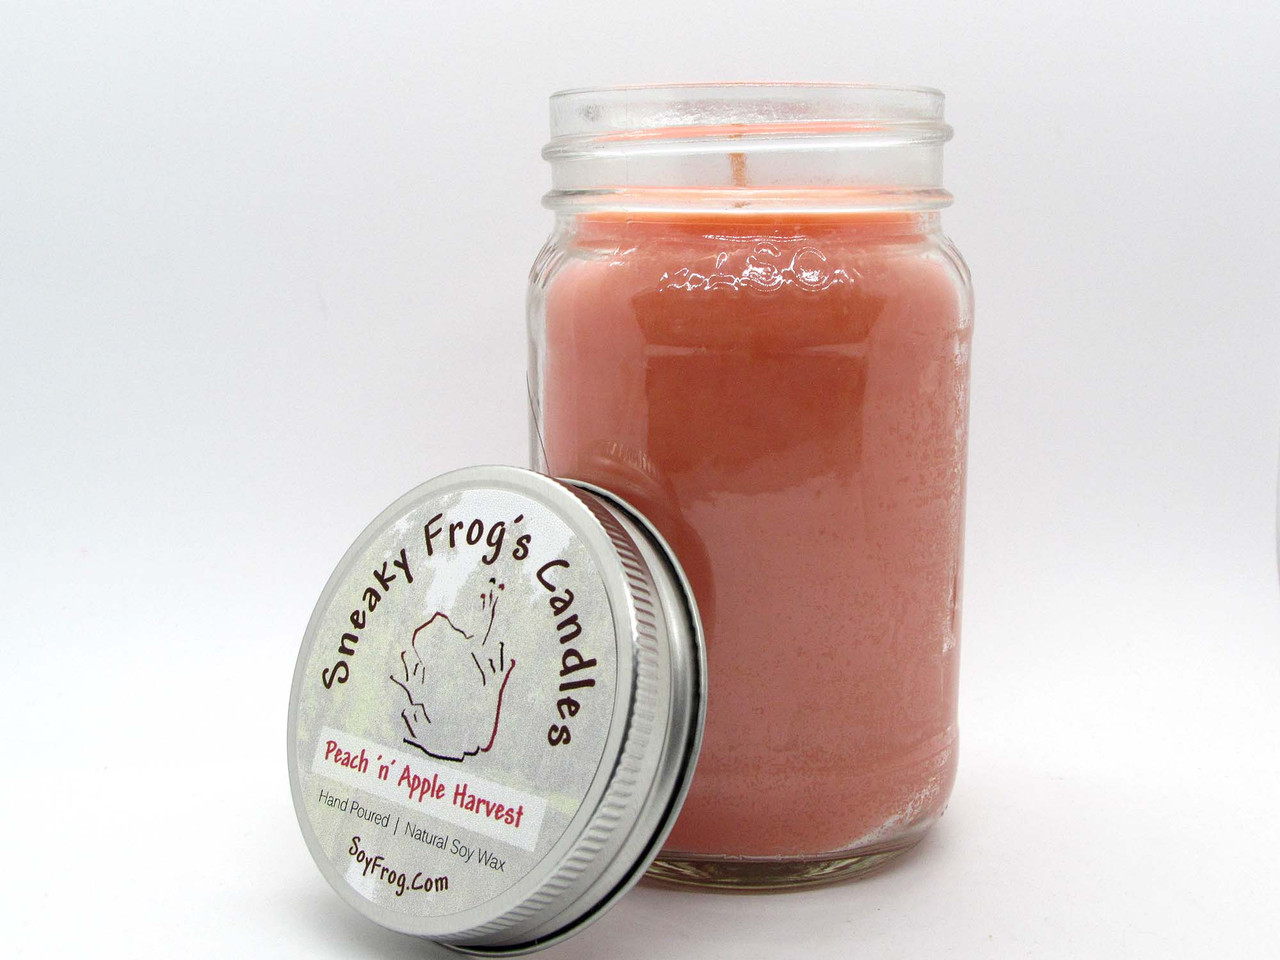 Peach 'n' Apple Harvest Scented Natural Soy Wax Candles